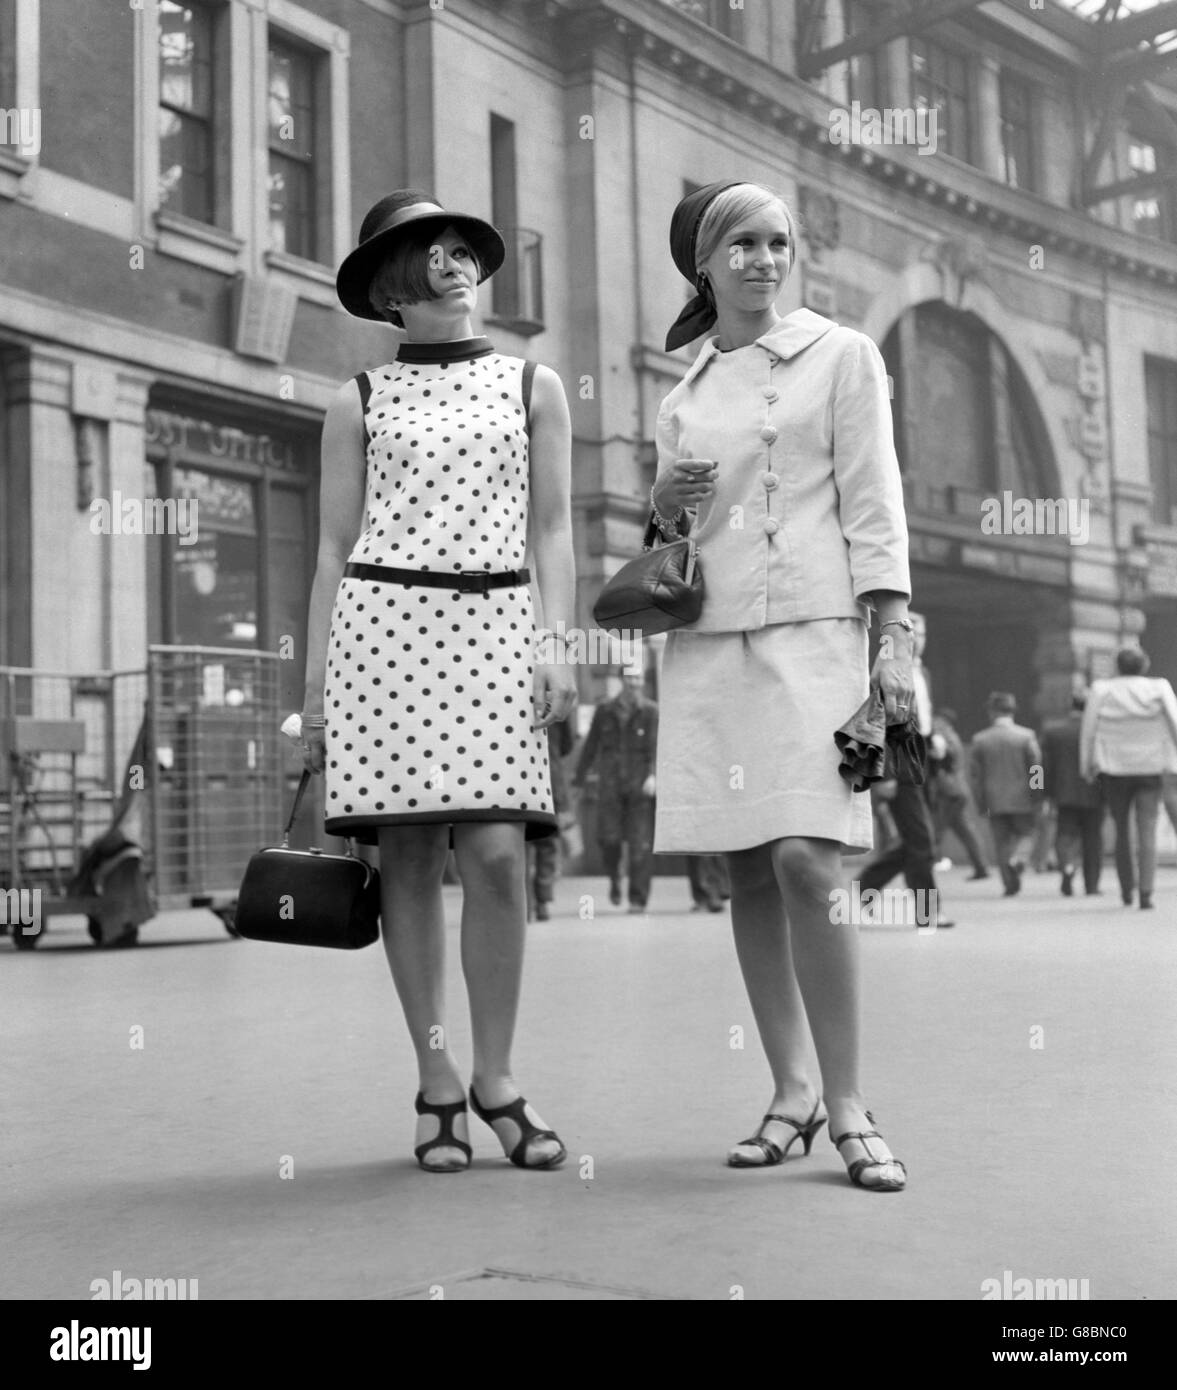 (l-r) Eliane Barthus, 20, wearing a black Spanish-style hat with a polka dot dress, and Jean Storer, 21, in a pastel blue velvet suit and headscarf, leave Waterloo Station in London for the second day of the Royal Ascot race meeting. Stock Photo